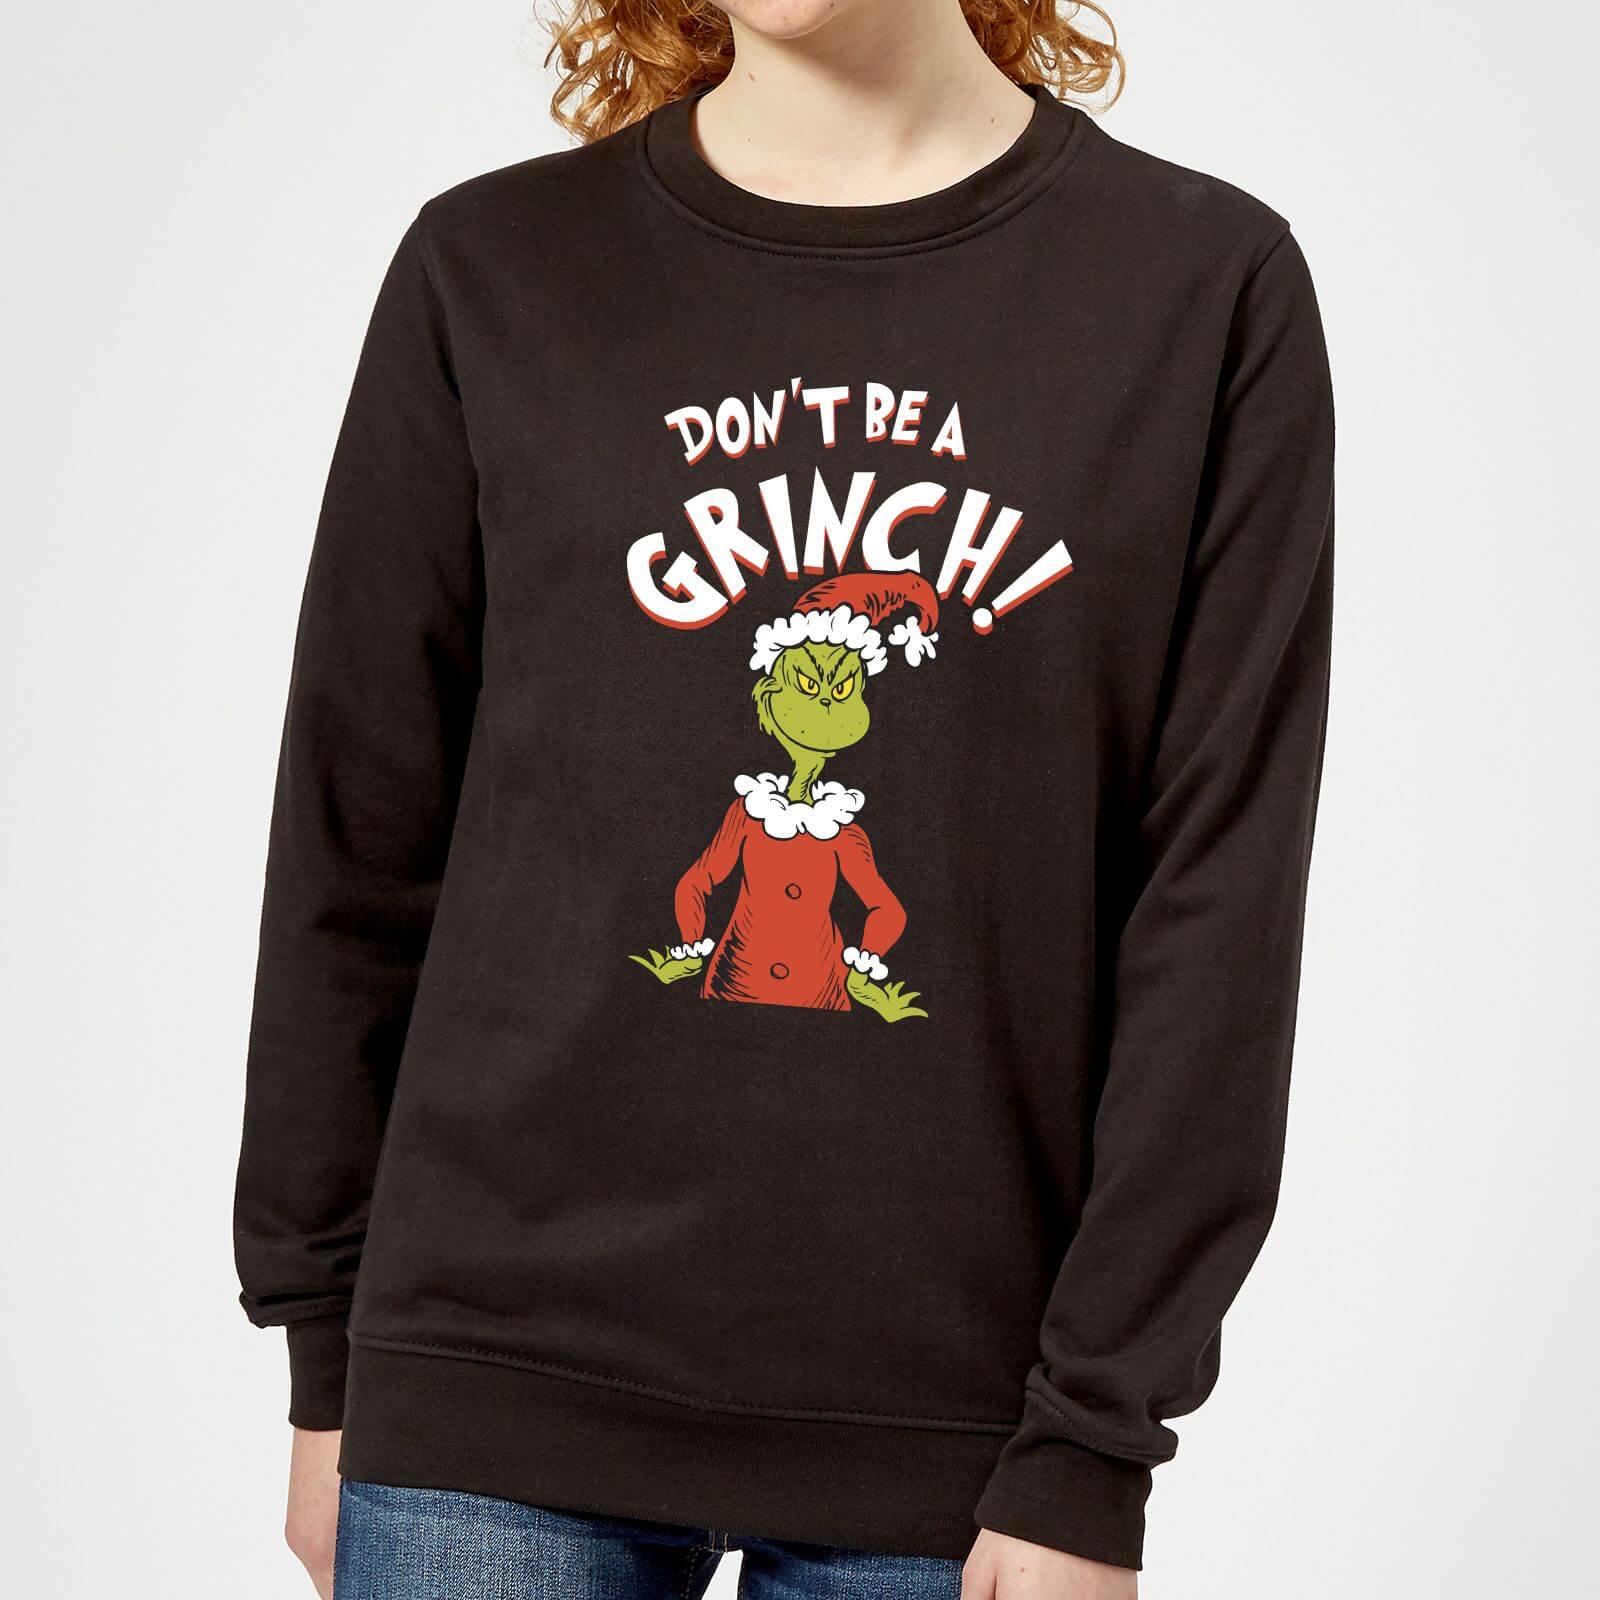 The Grinch Dont Be A Grinch Women's Christmas Sweatshirt - Black - XS